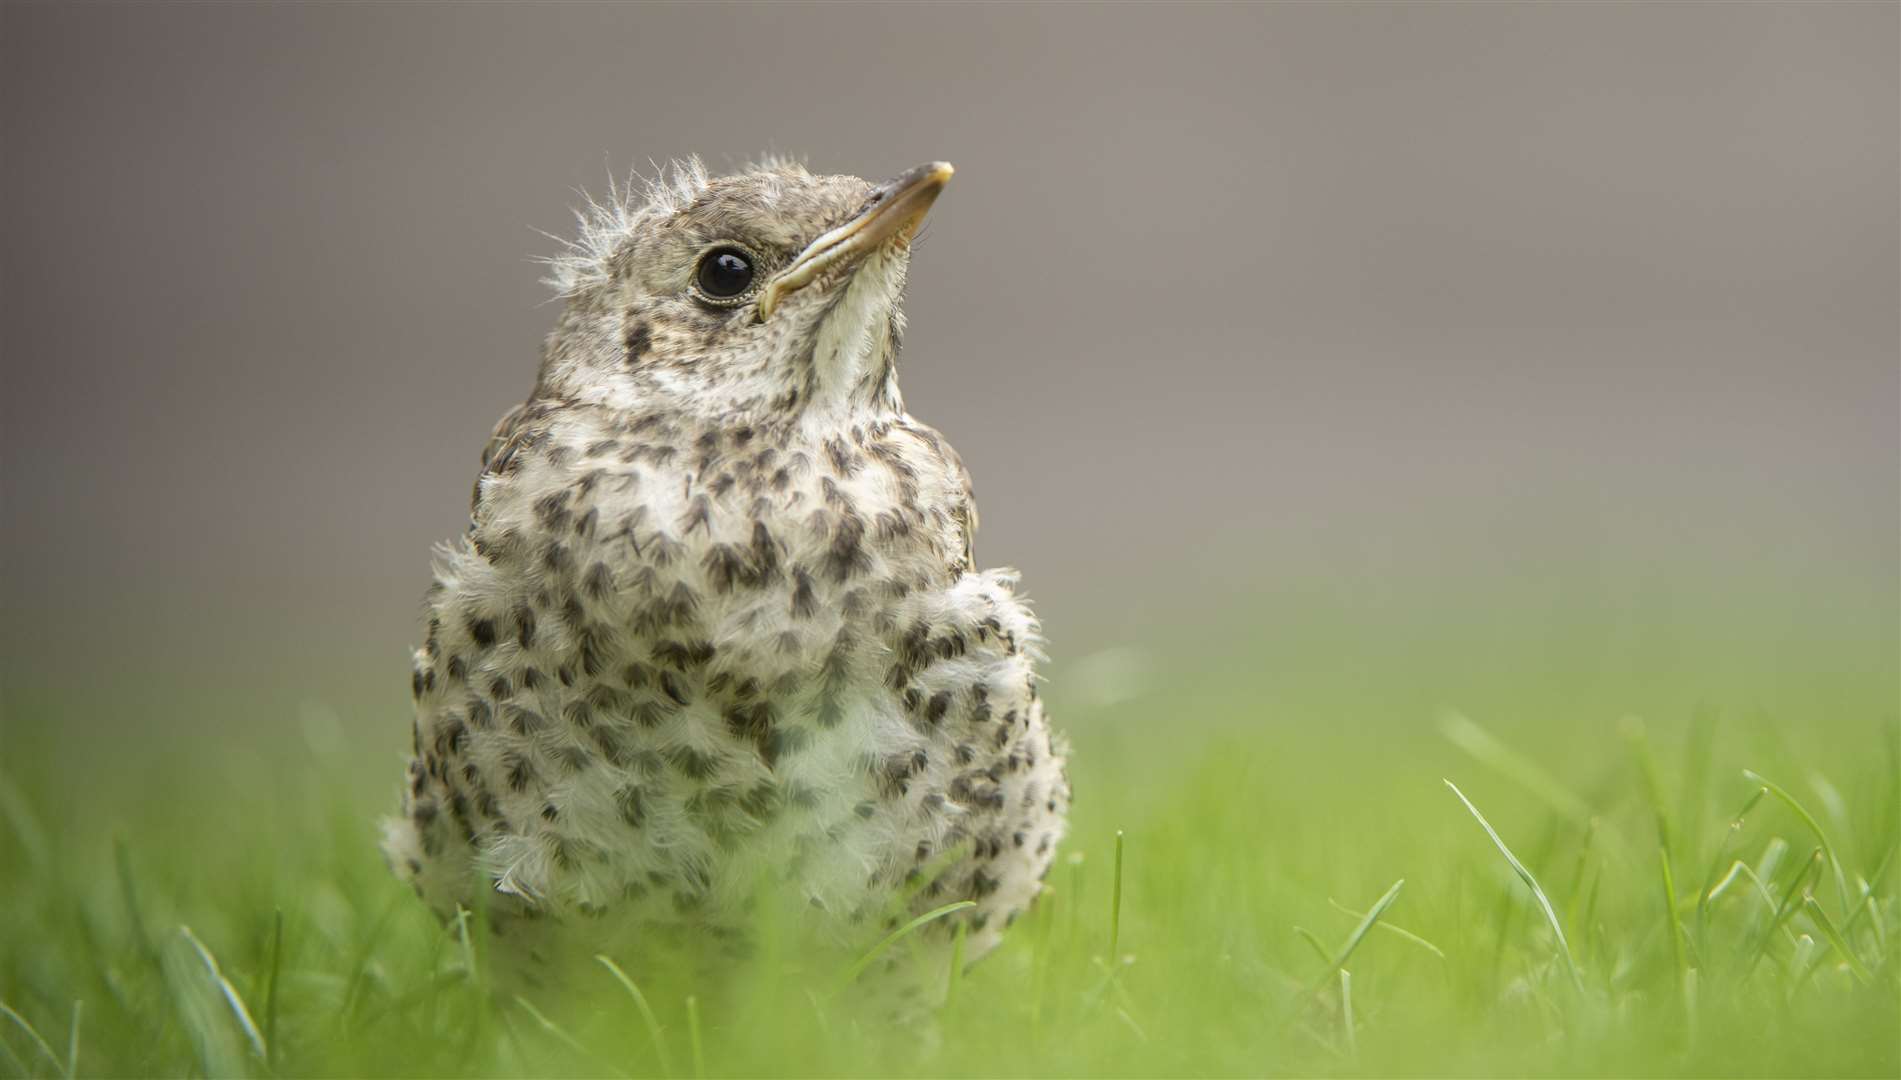 It's not unusual for baby birds who have recently braved leaving their nest to be seen on the ground Picture: RSPB